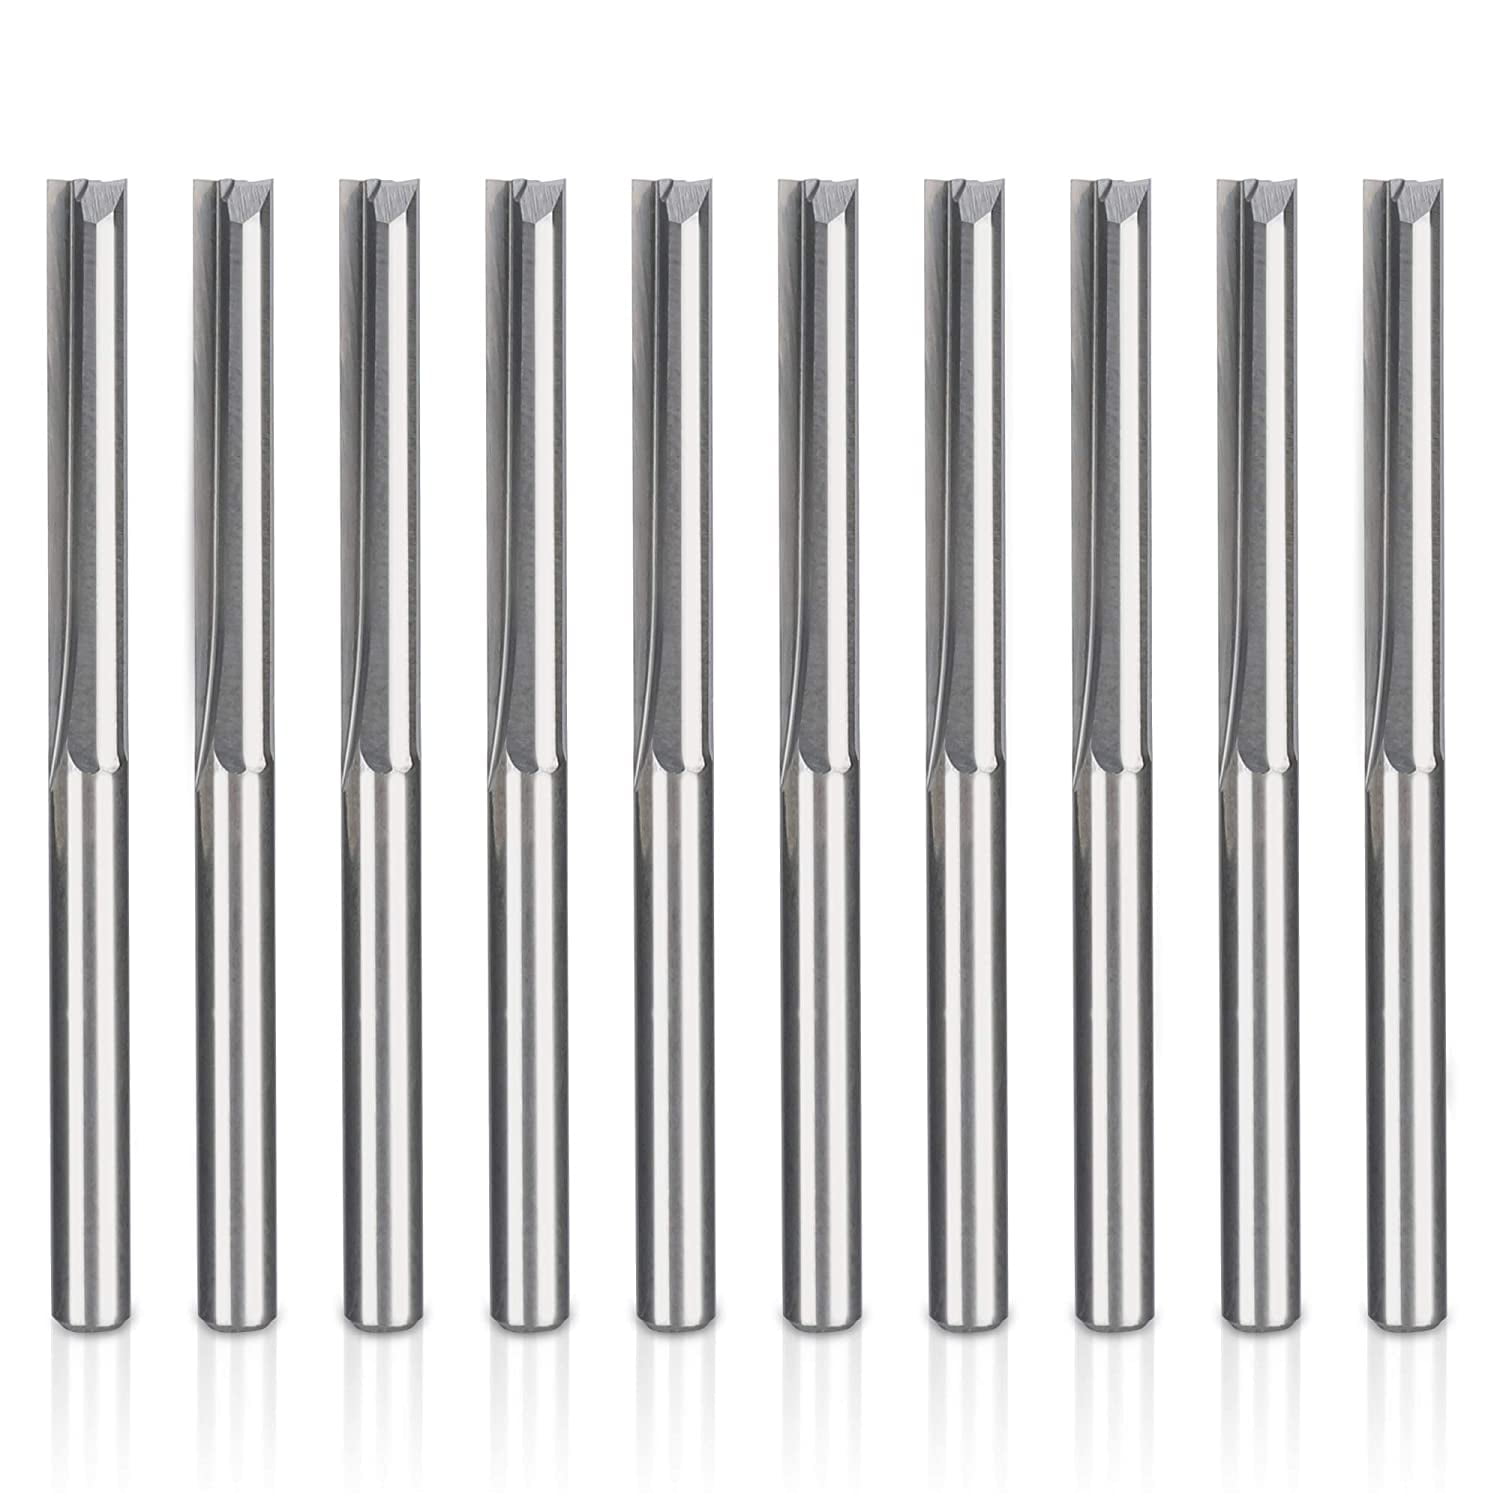 10PCS 1/8" 22mm Single Flute Spiral Router Bits Fits For Acrylic PVC Wood 